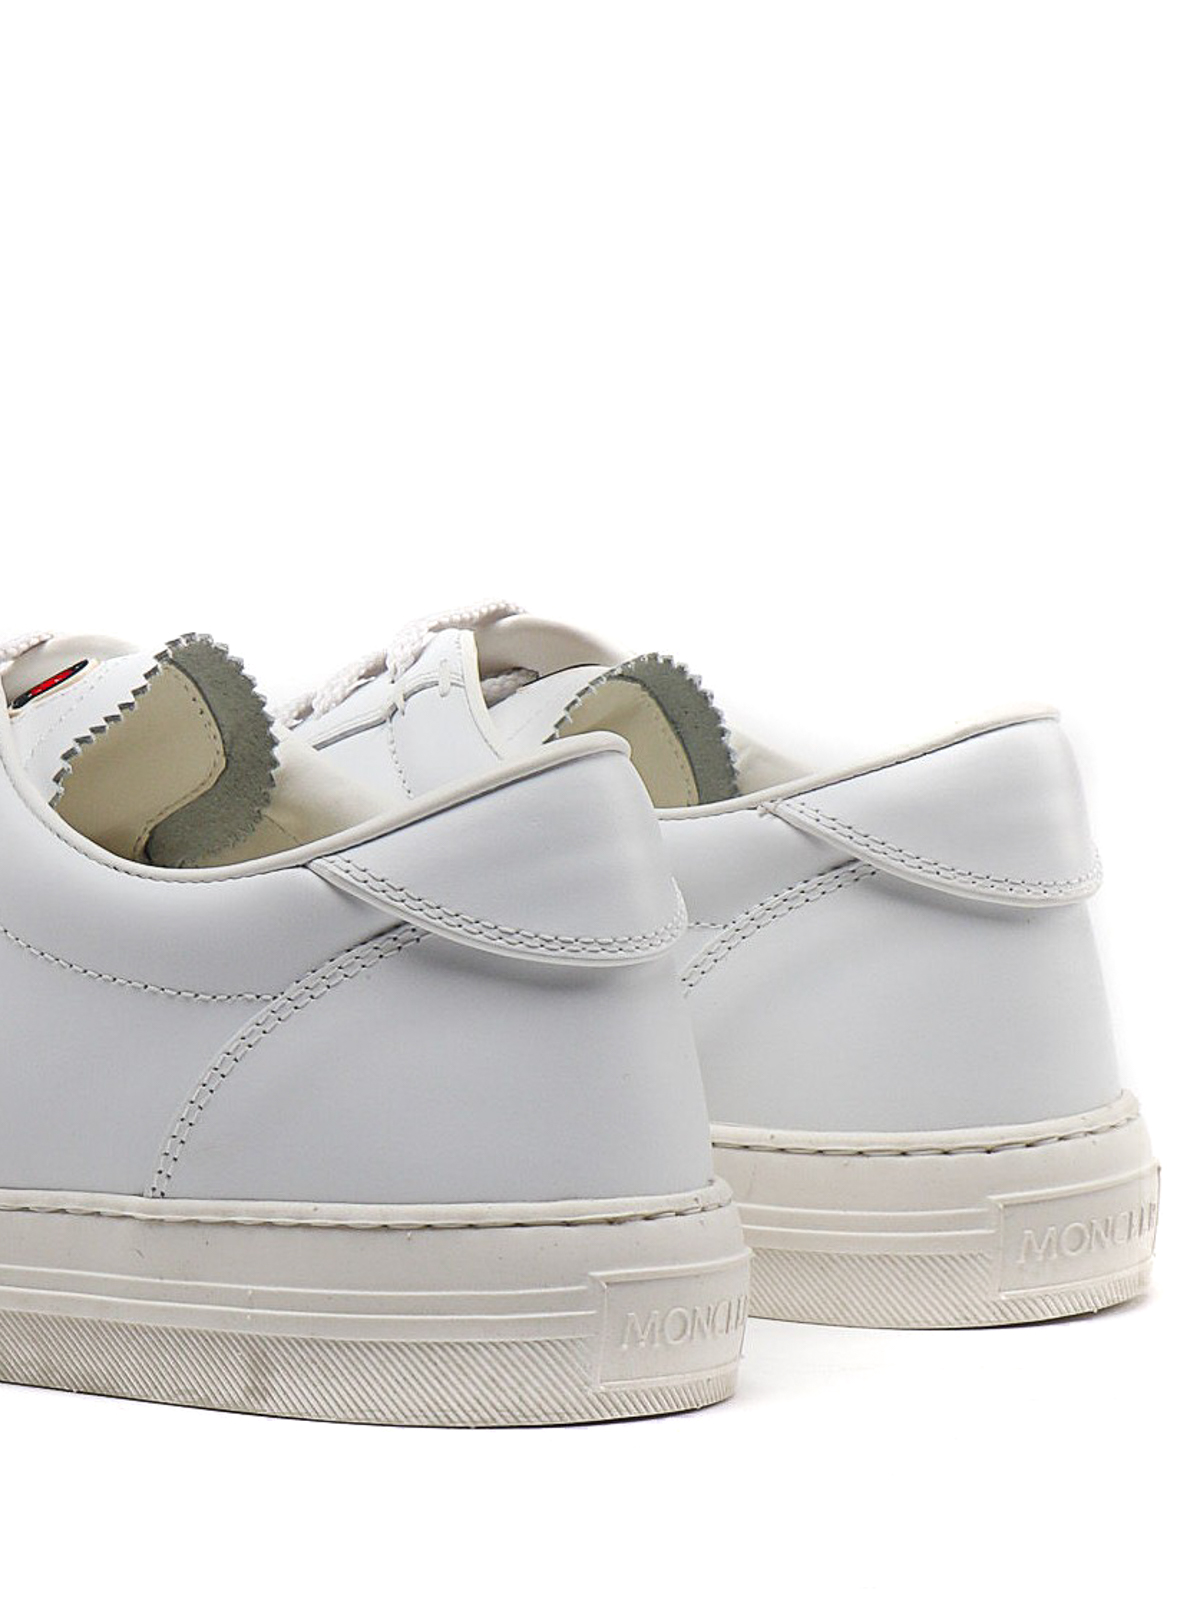 moncler white trainers